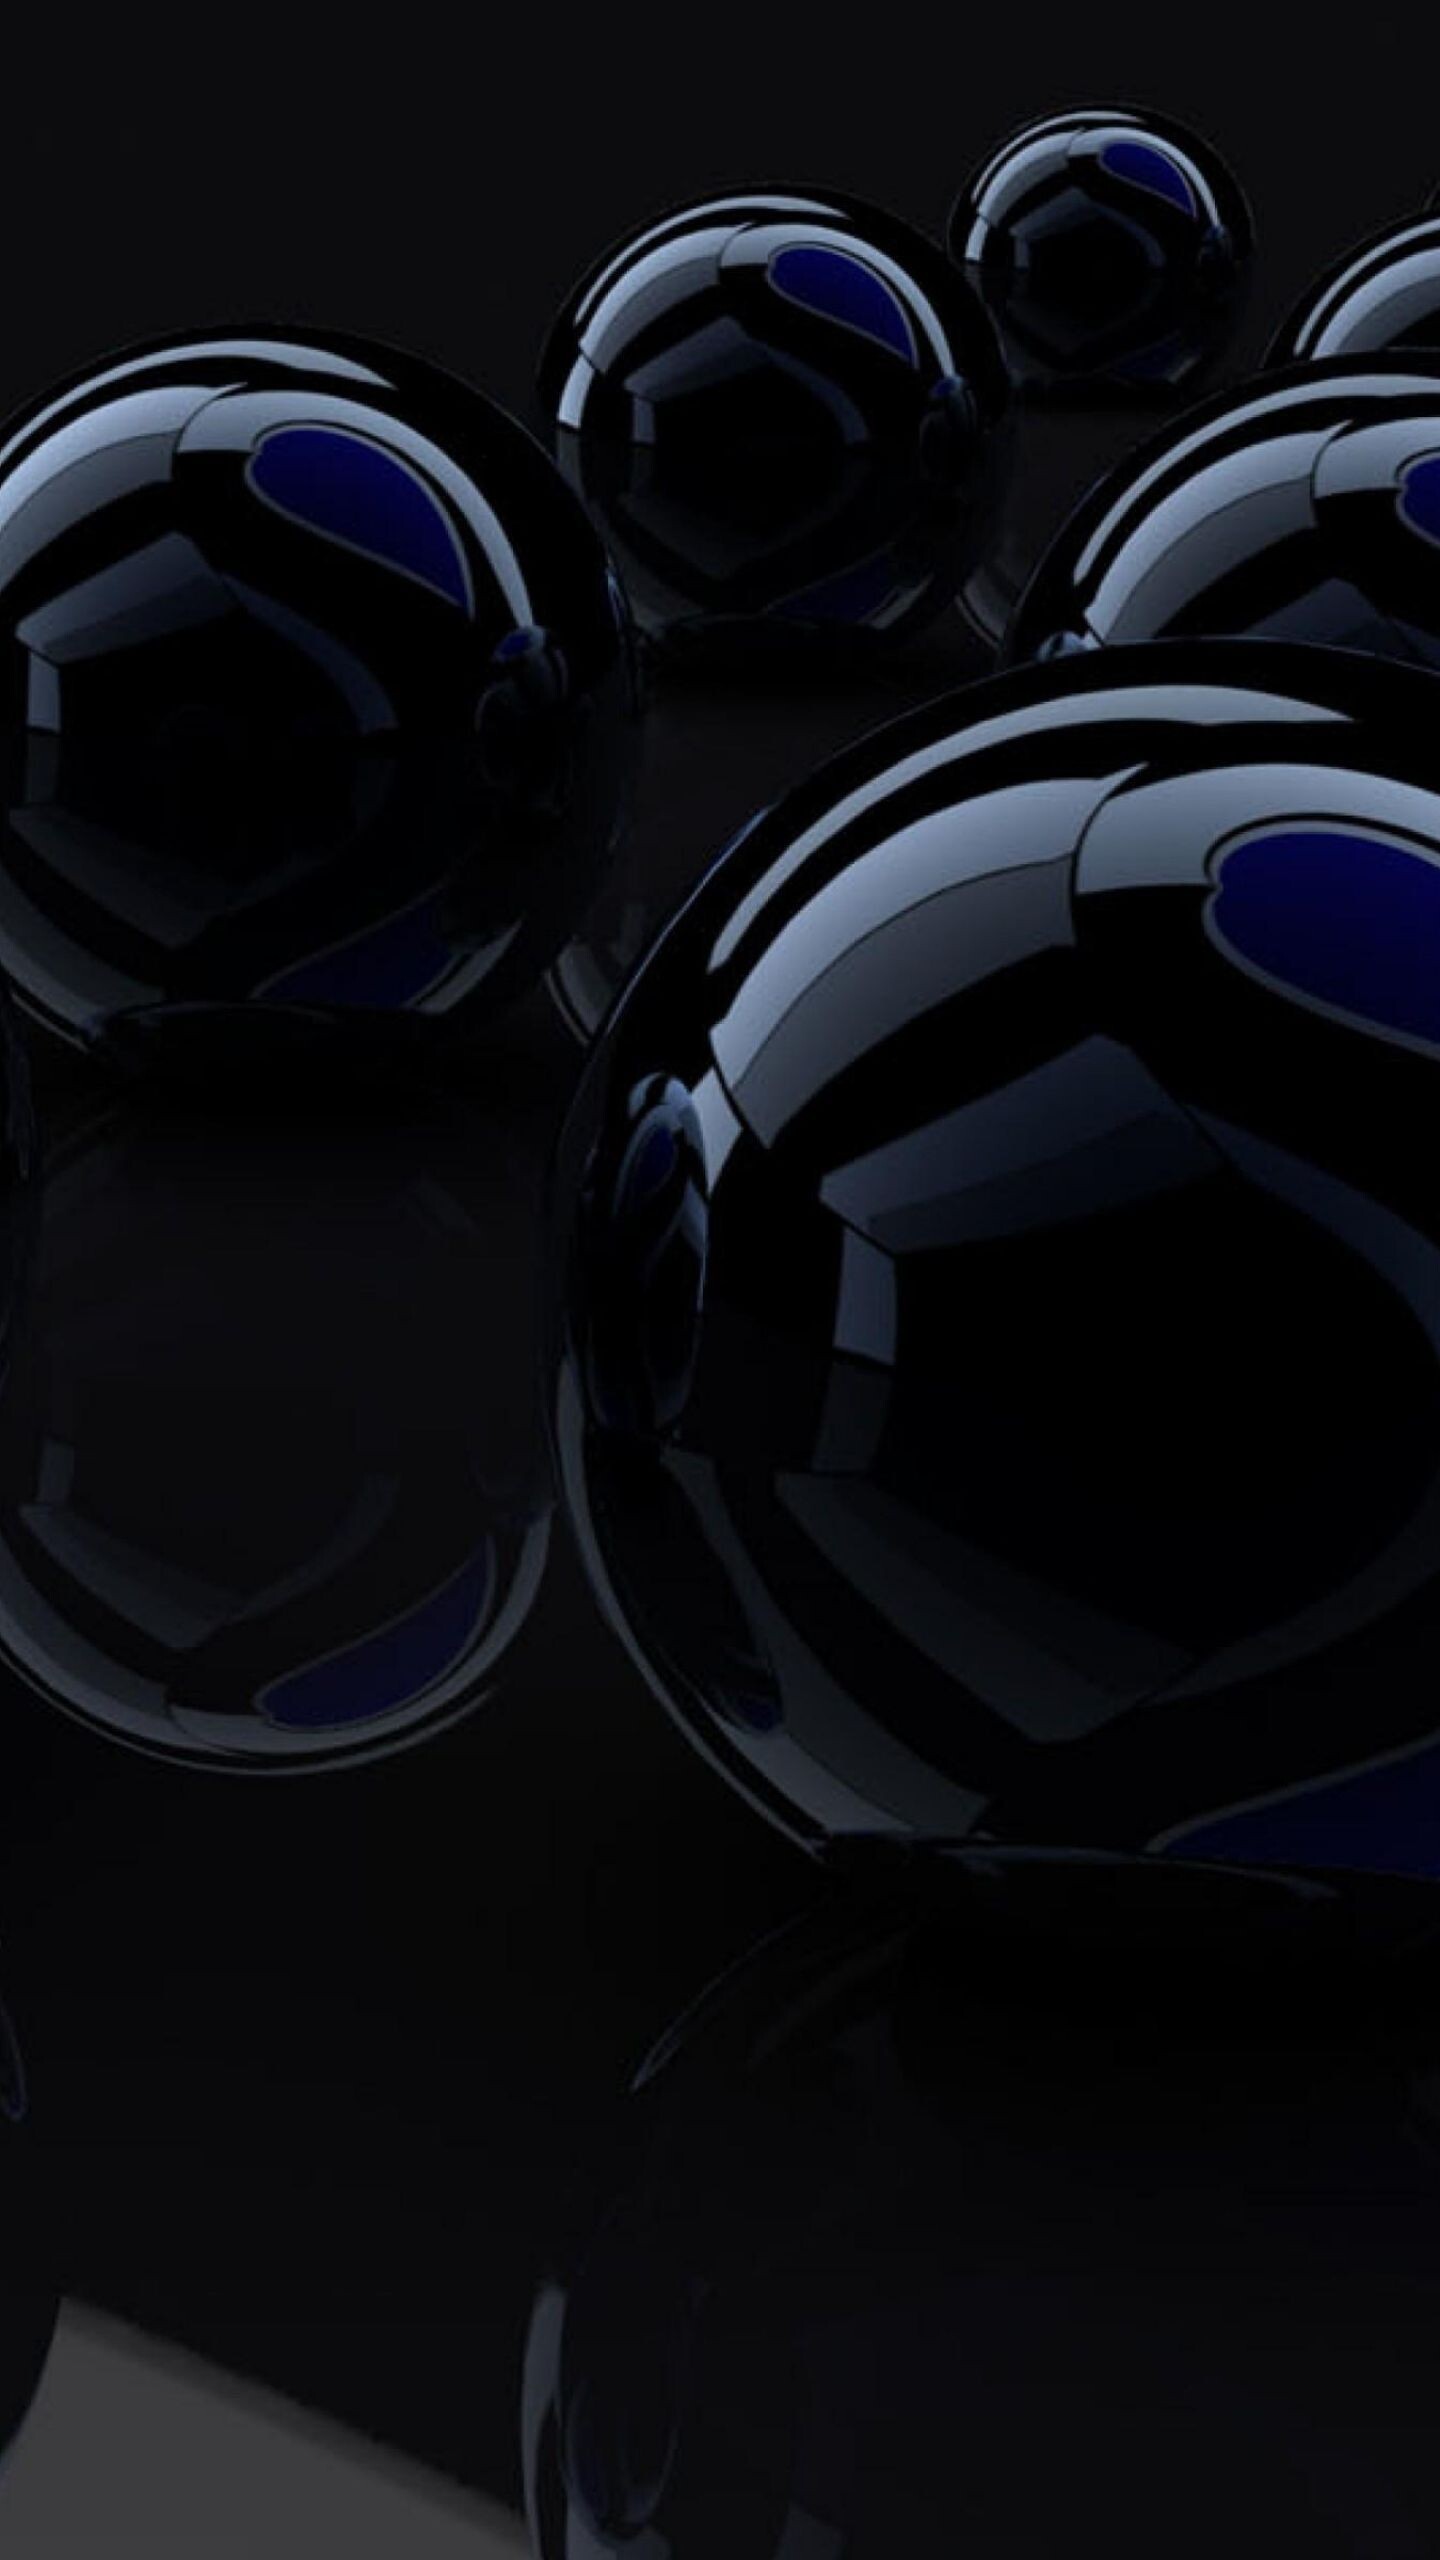 Glass: Black spheres, An amorphous material formed from a melt by cooling to rigidity. 1440x2560 HD Background.